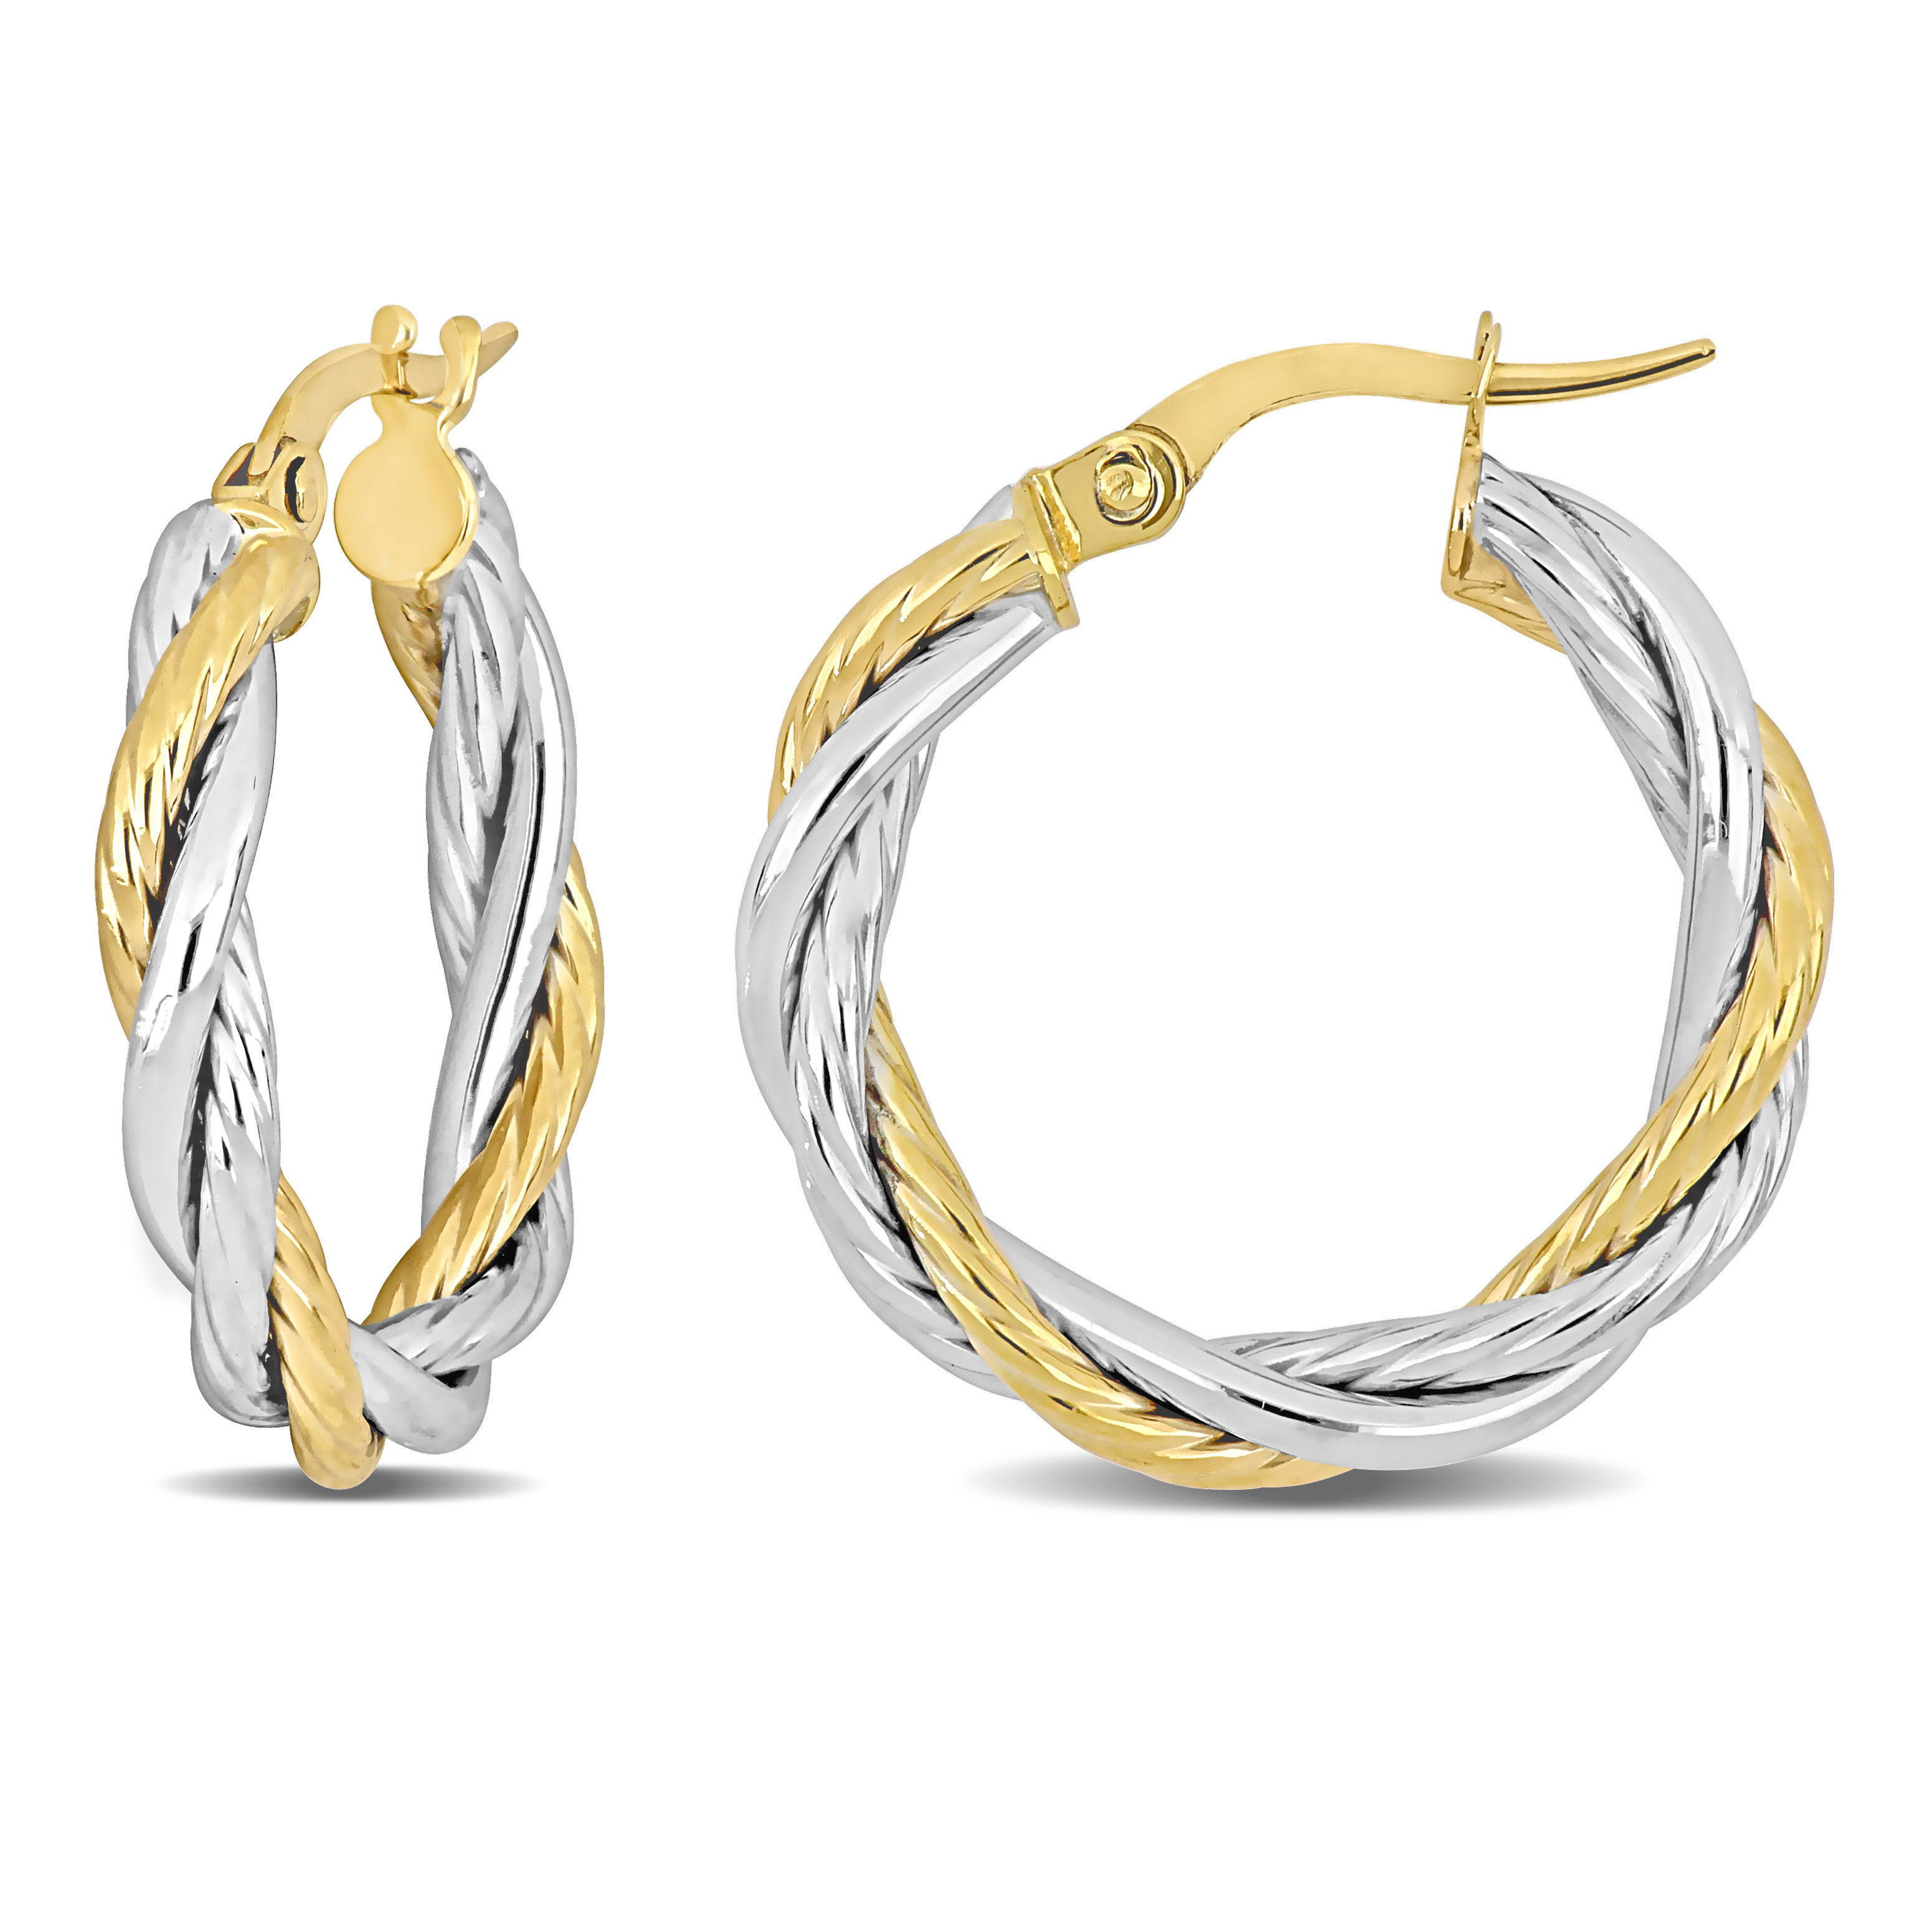 22 MM Polished Twisted Hoop Earrings in 2-Tone 10k White & Yellow Gold